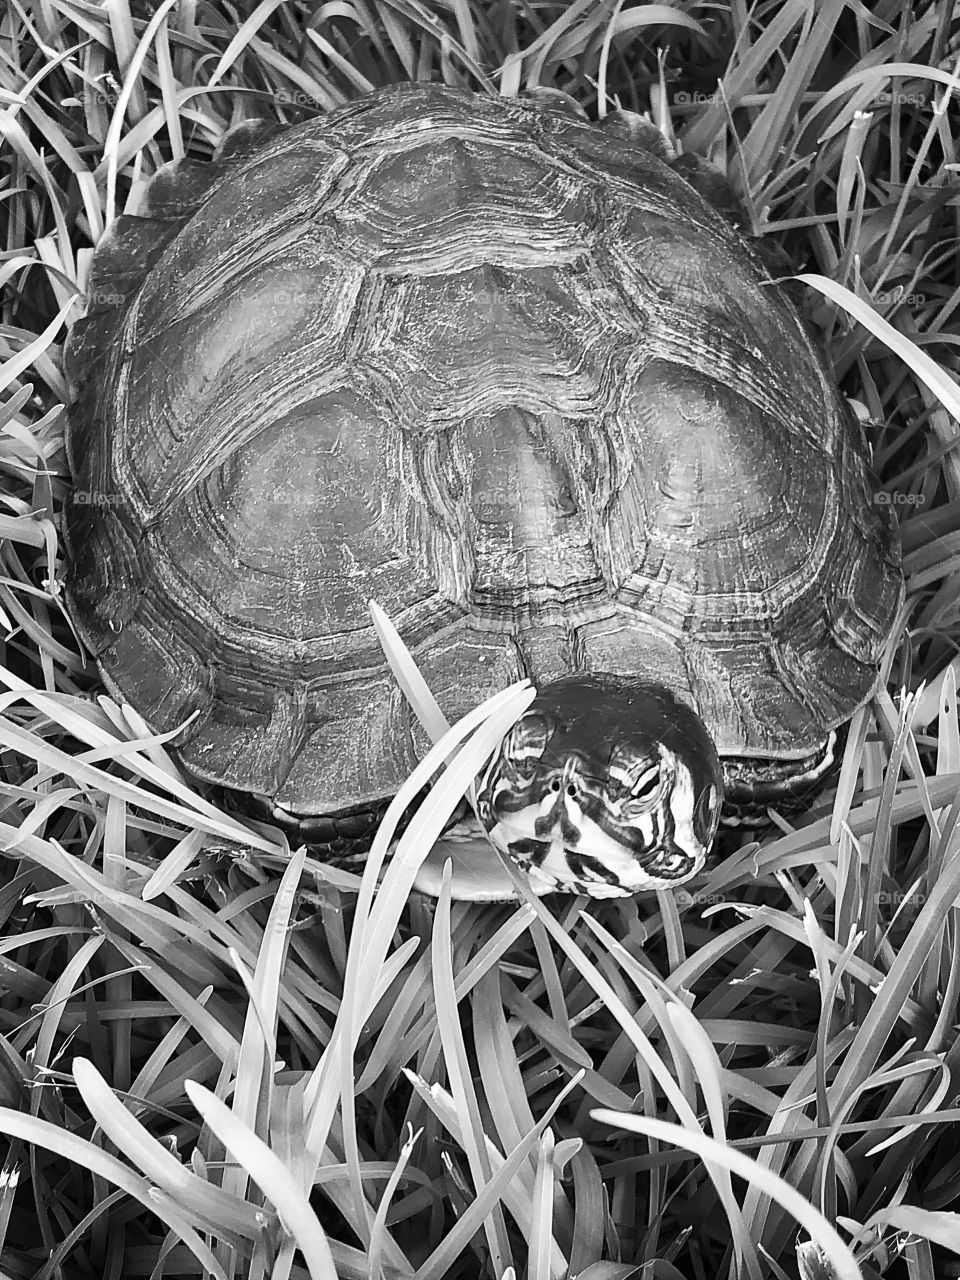 Pet yellow belly turtle in black and white loving the summer sun 